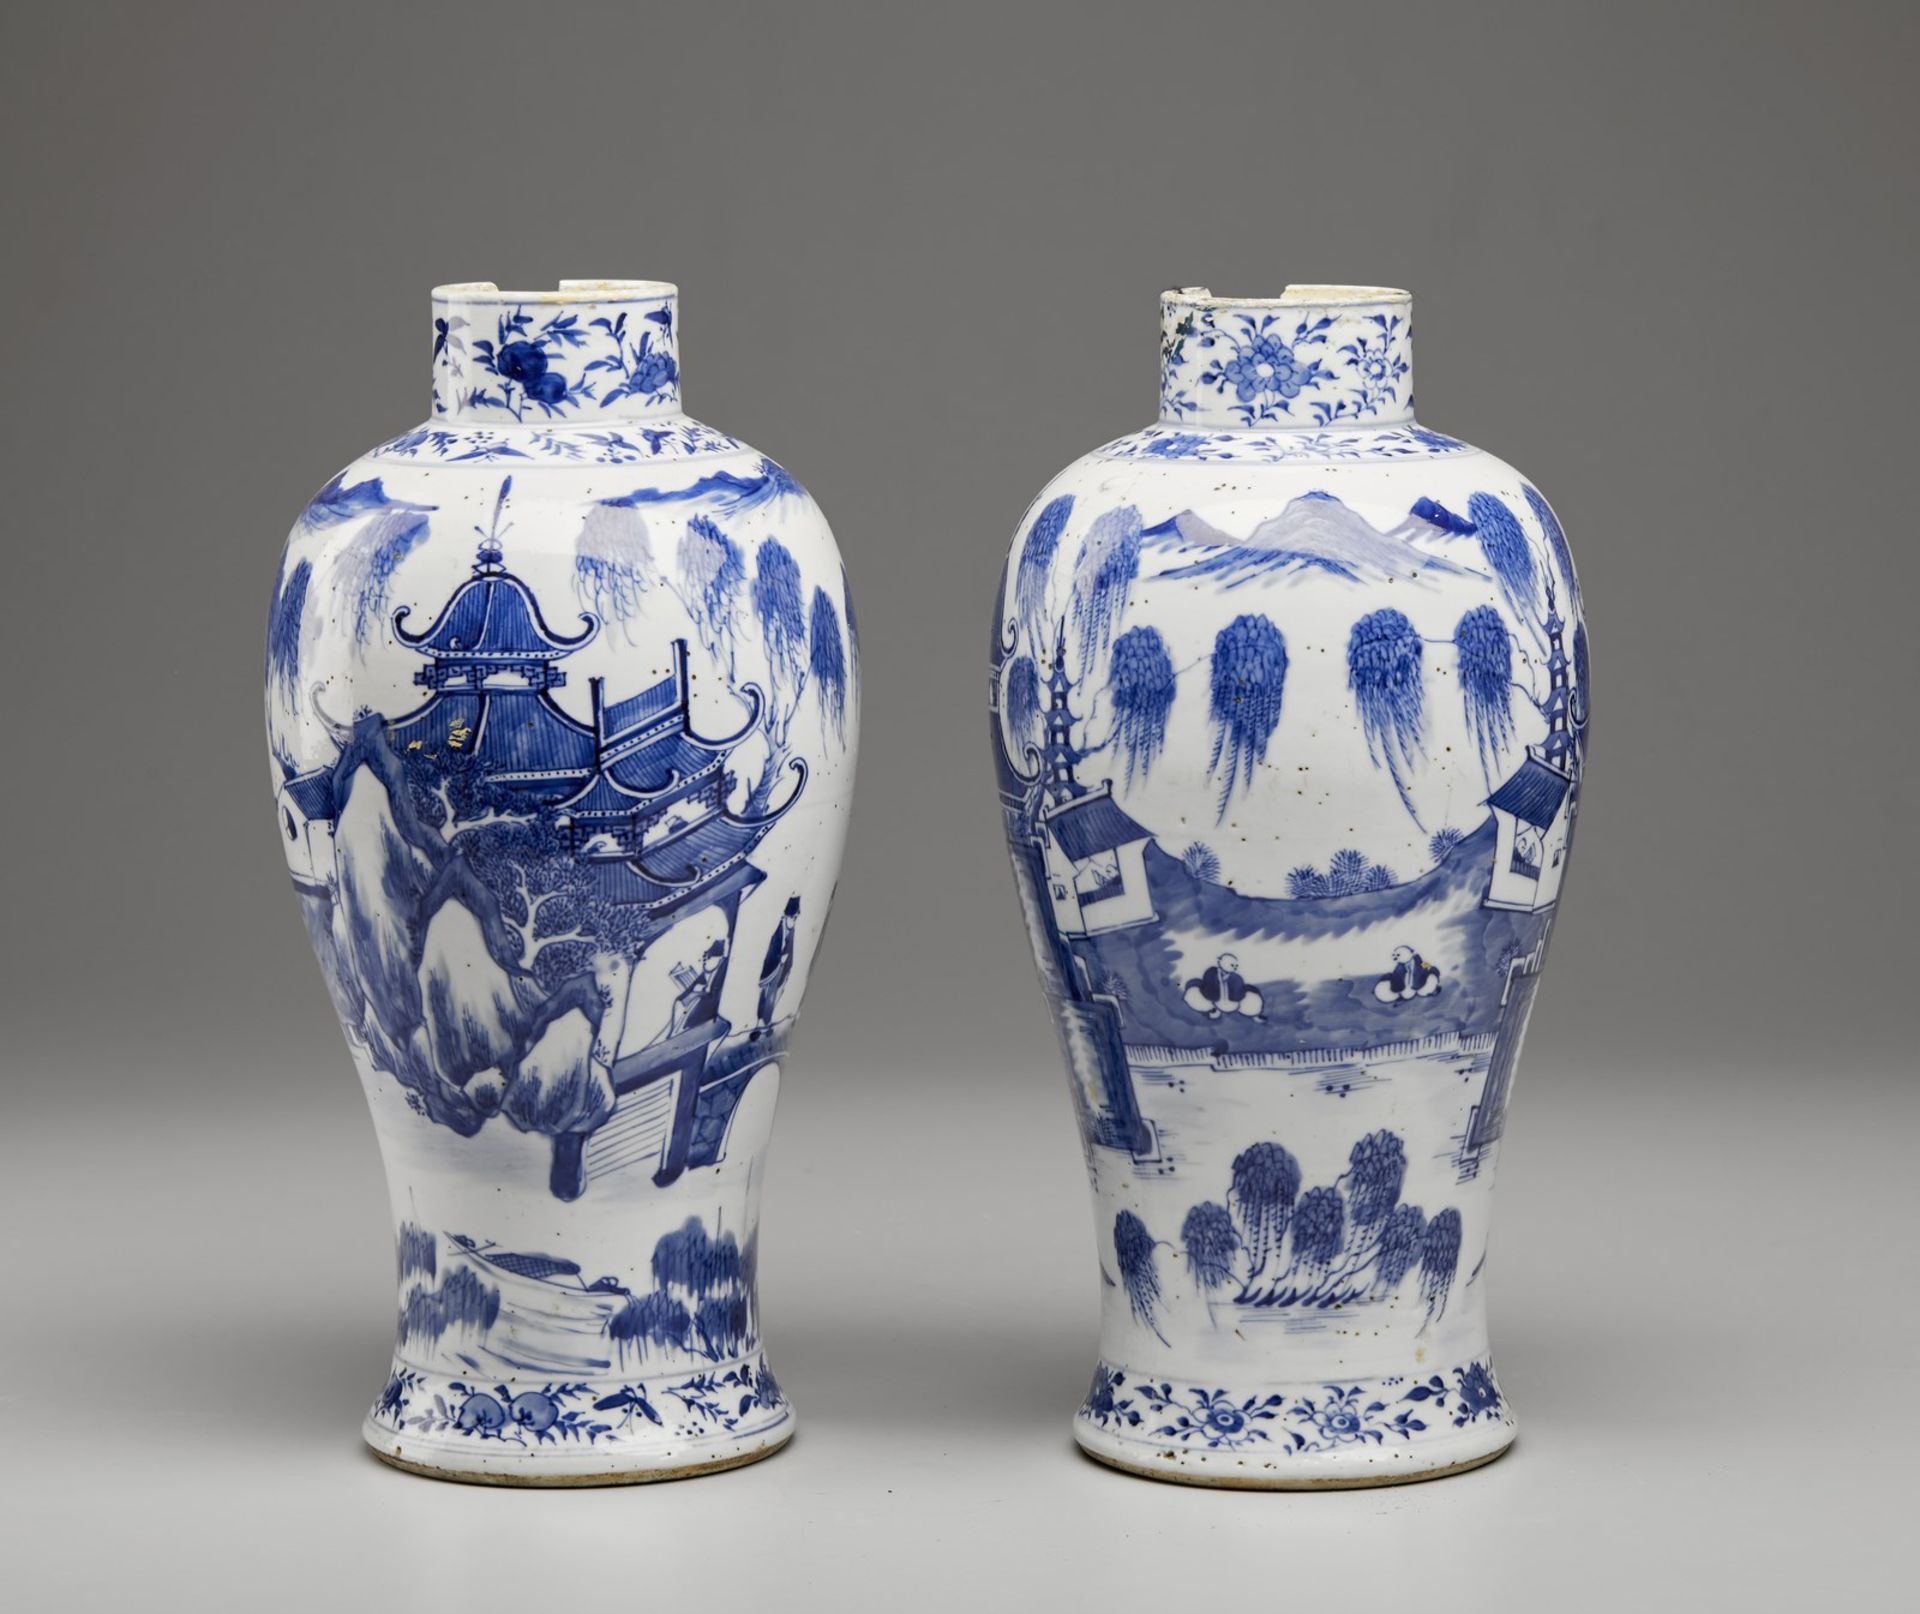 A pair of blue and white porcelain baluster vases bearing a four character mark at the base China,